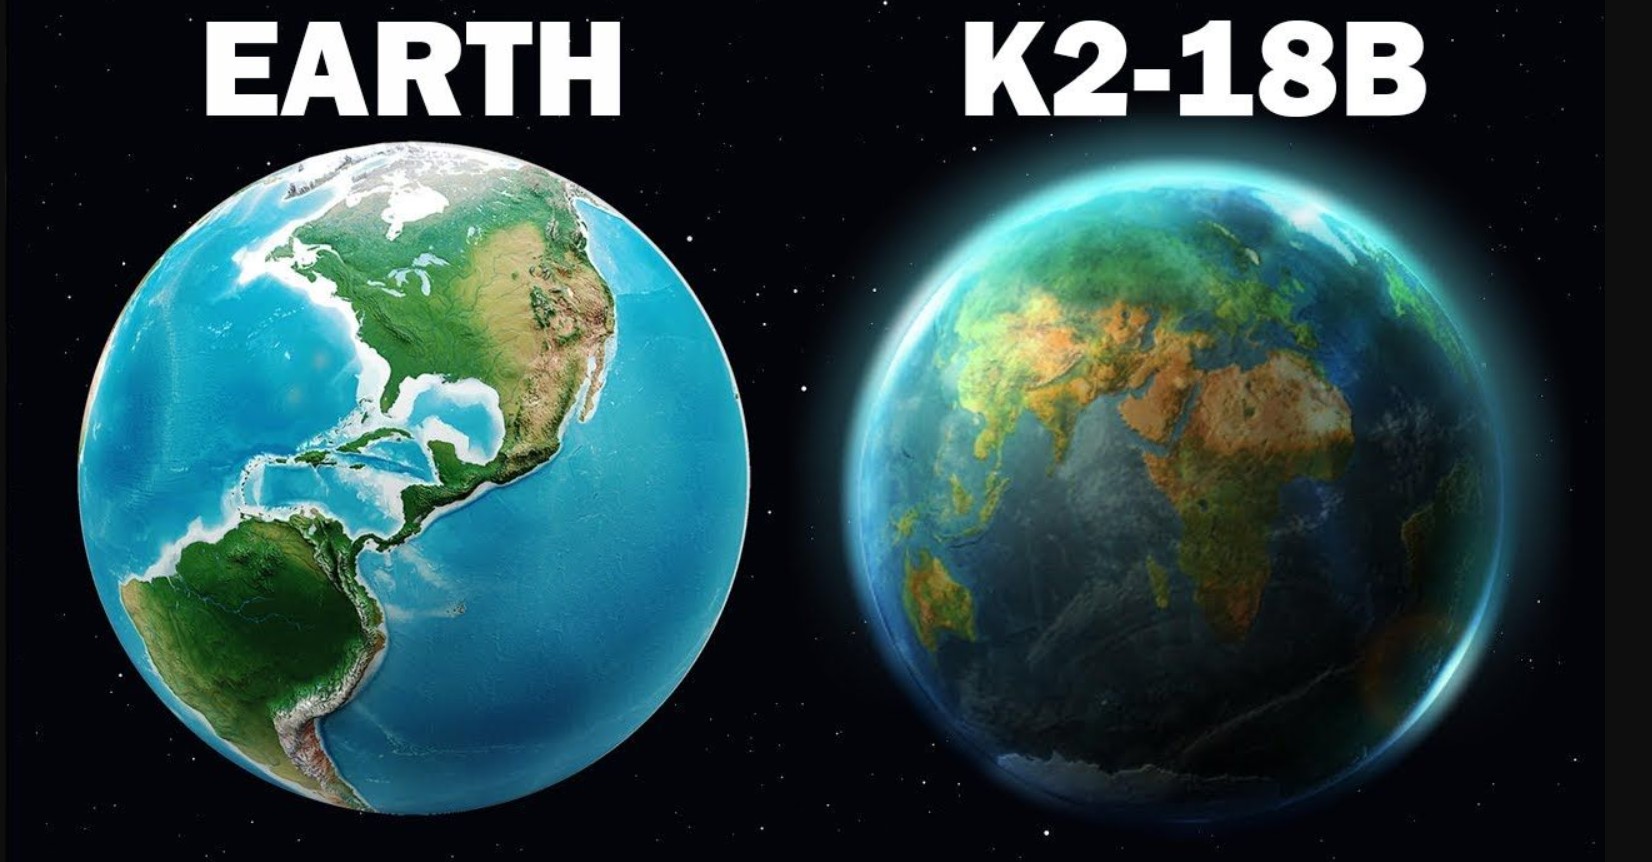 Life Clues on K2-18 b? Hydrogen-Rich Atmosphere and Possible Oceans - GK Now